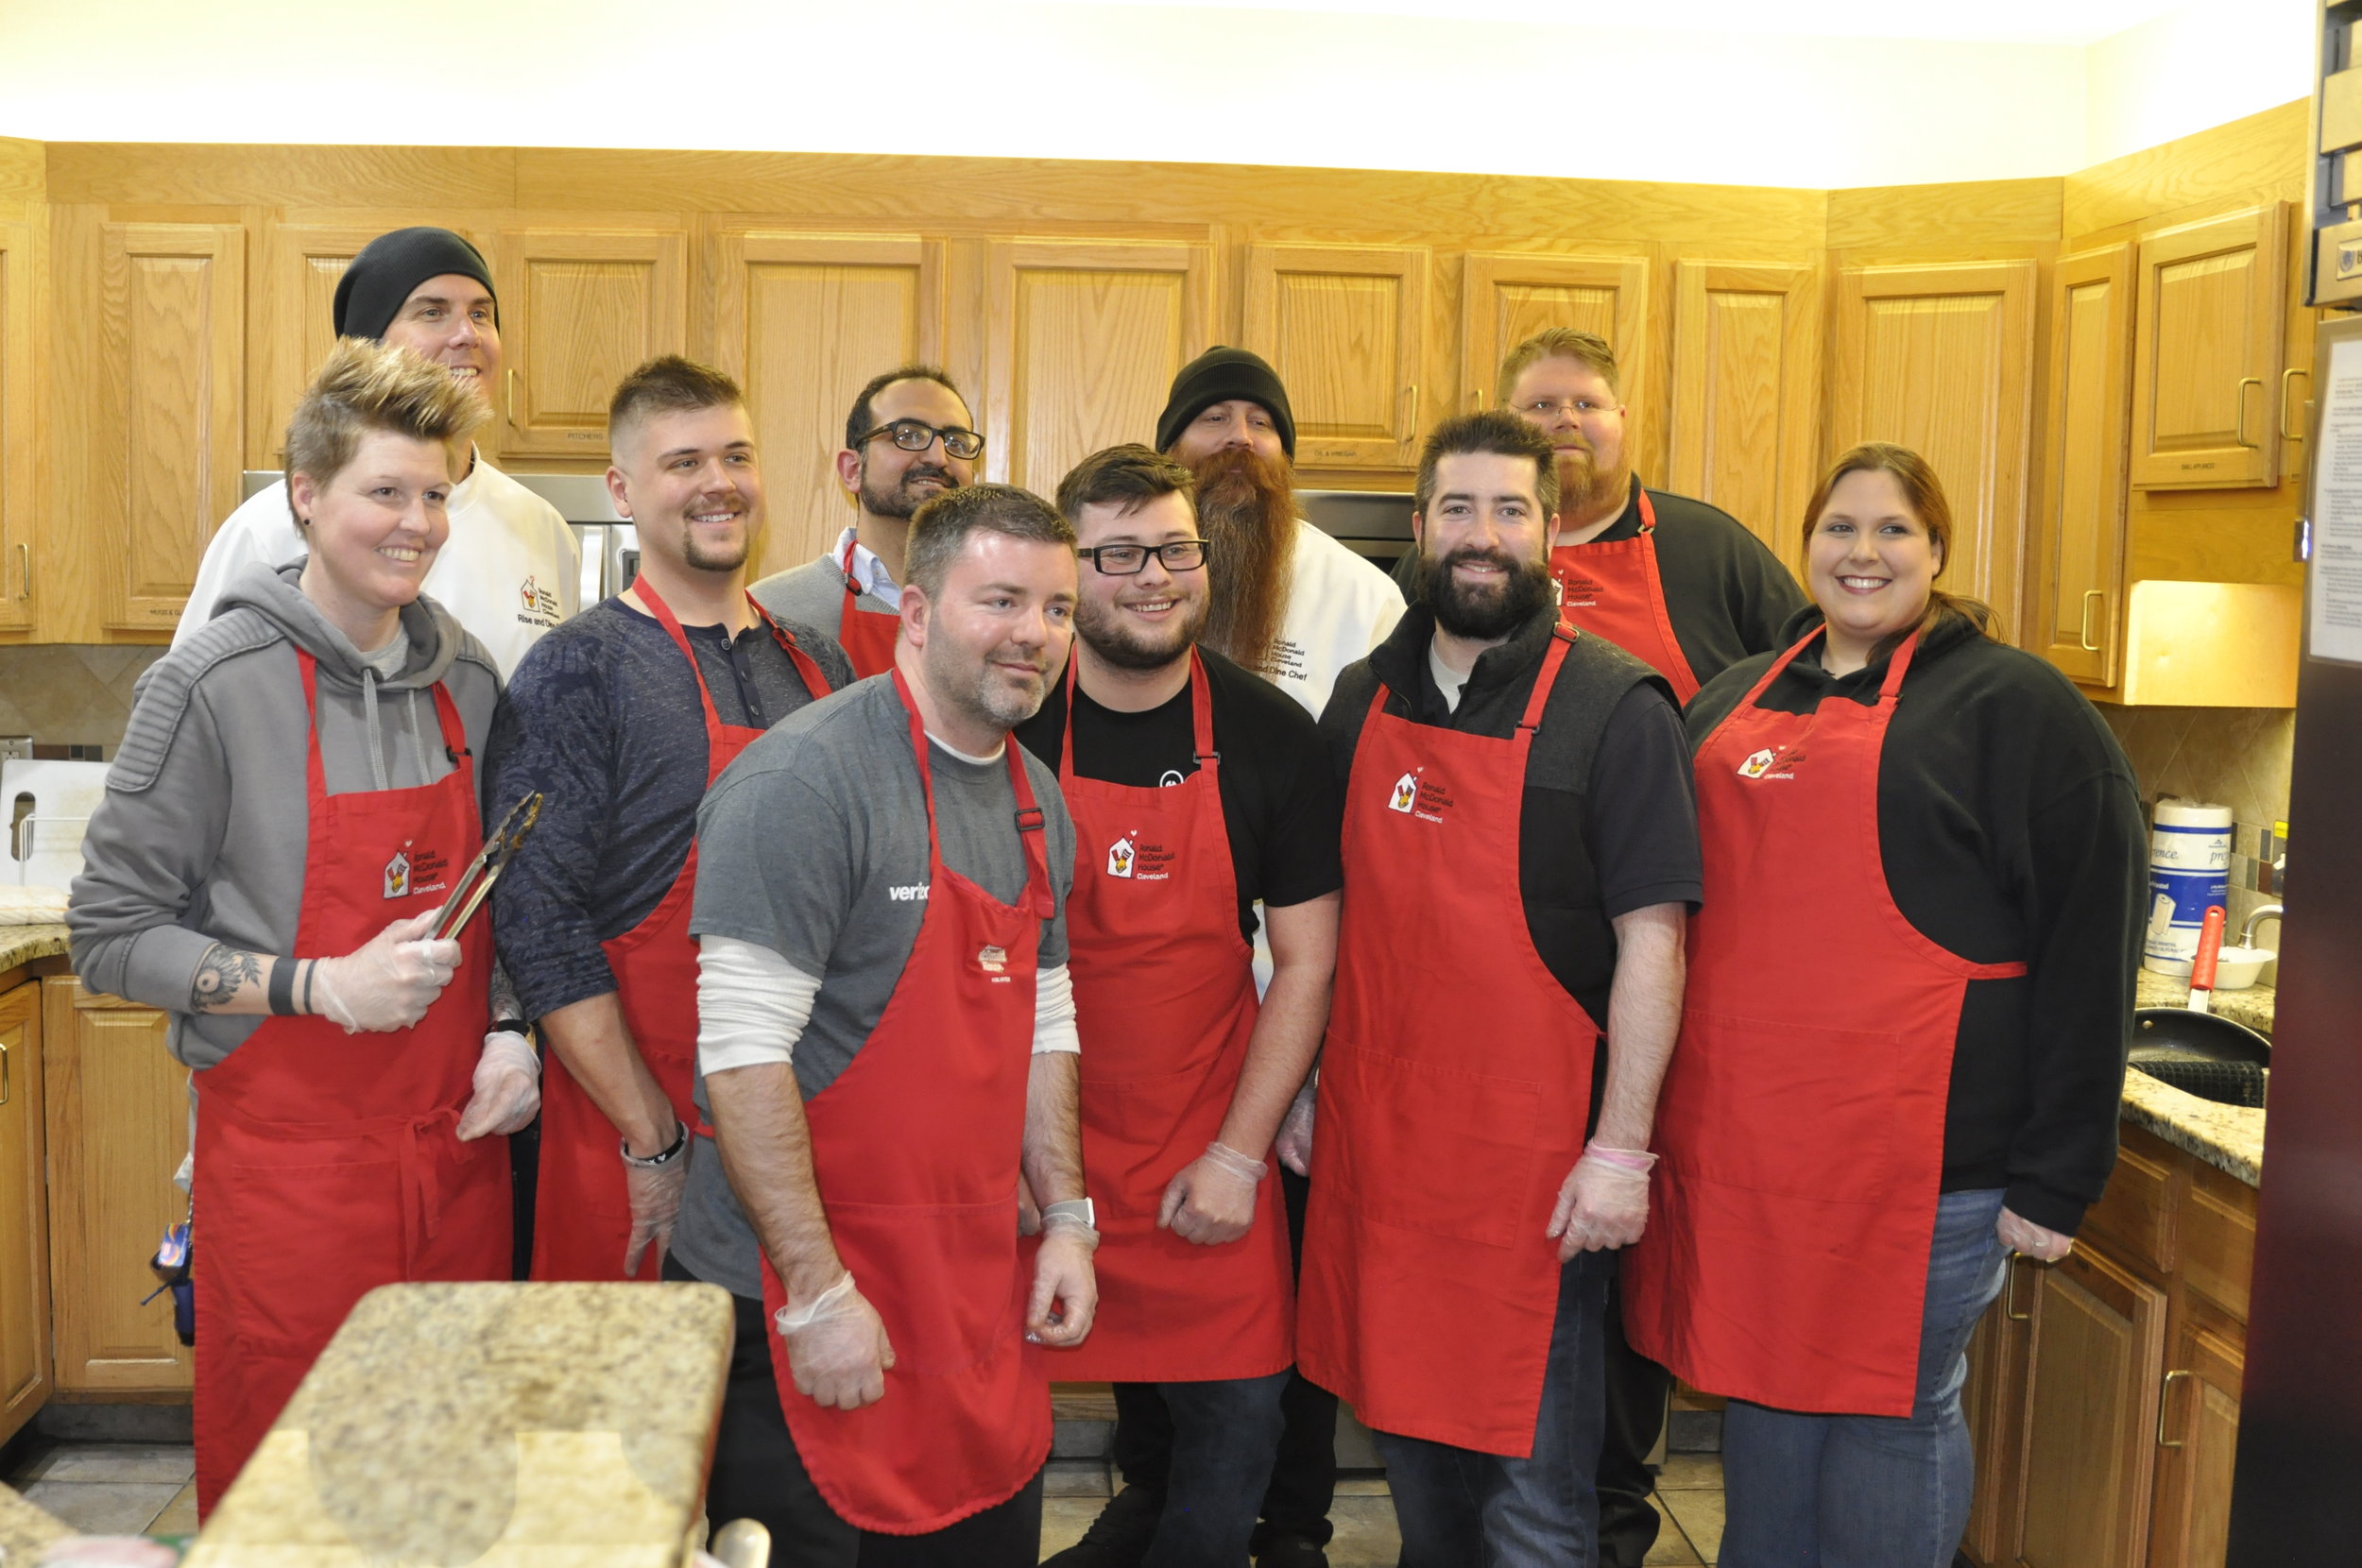 Group photo in the kitchen, wearing red aprons